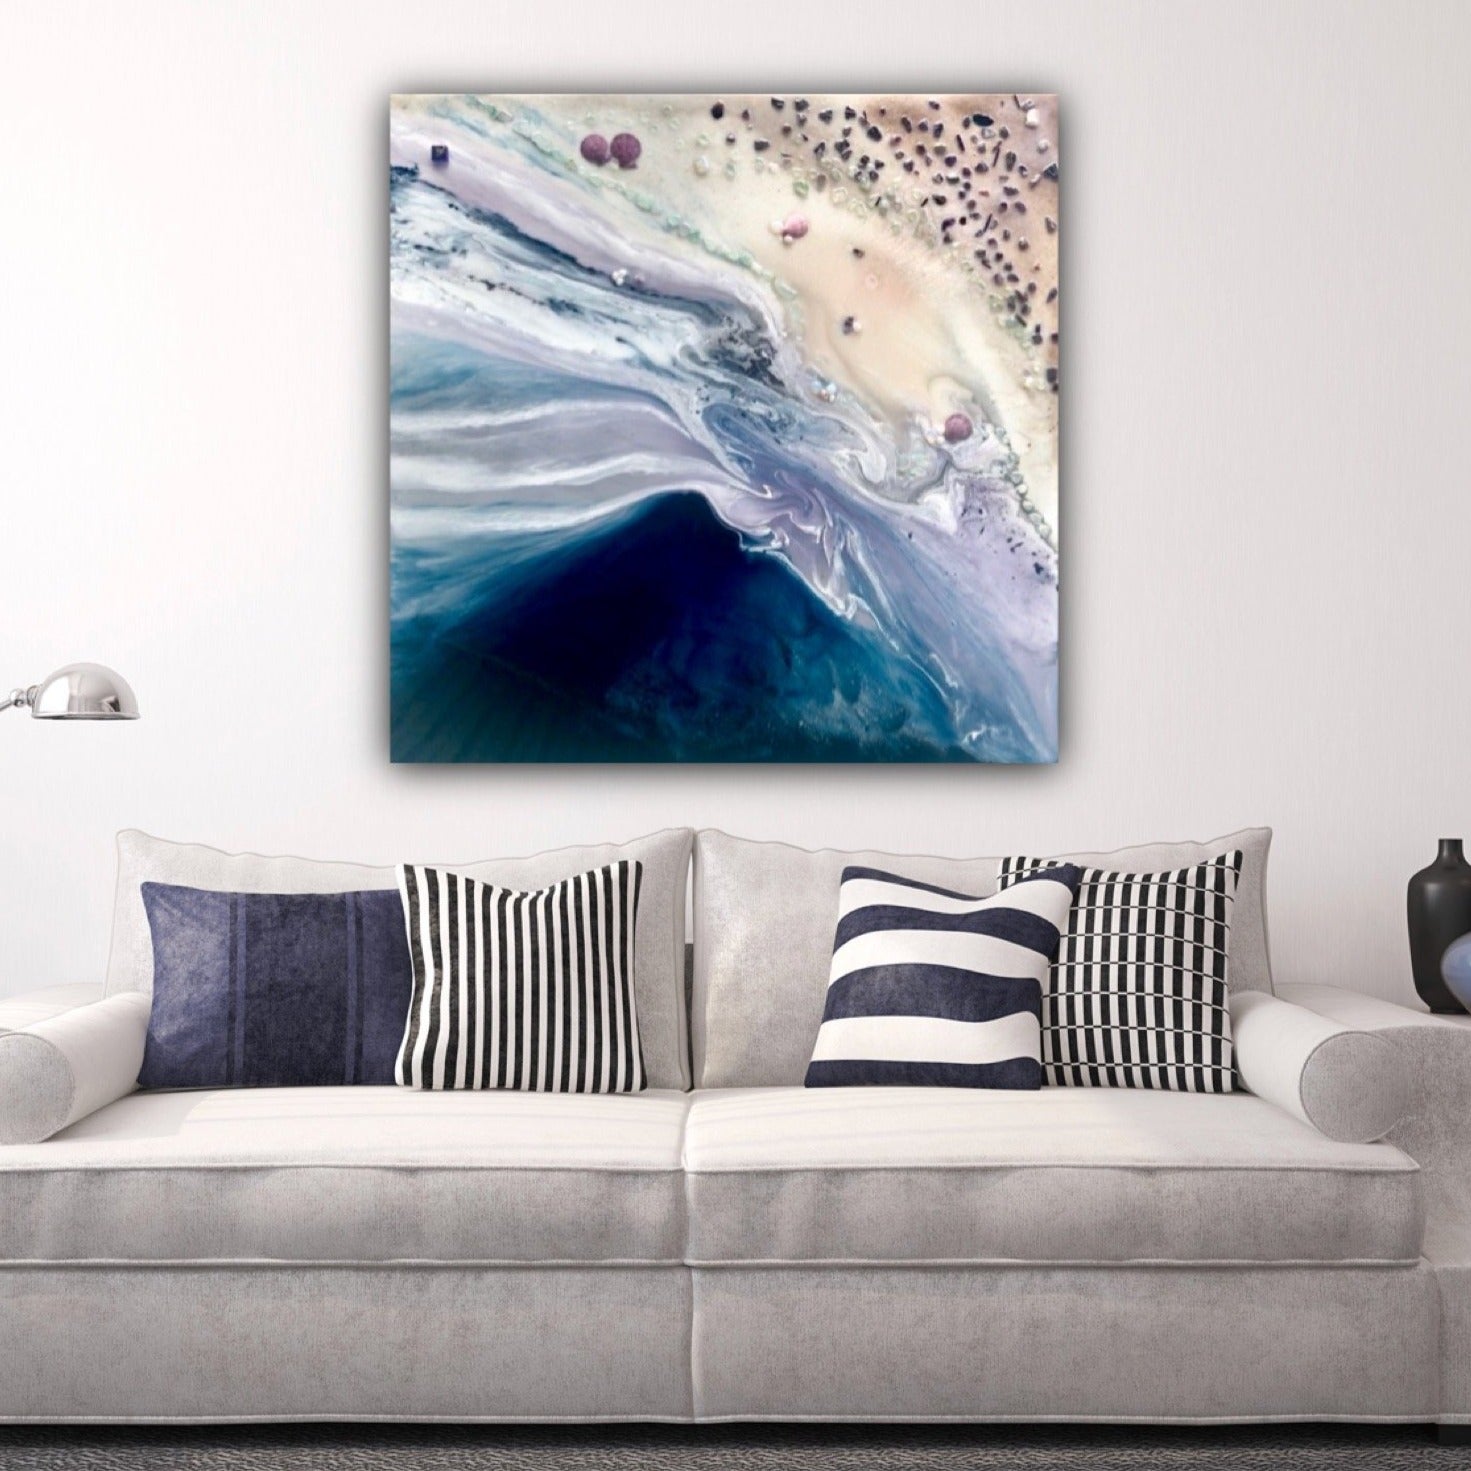 Twilight Date. Abstract Seascape. Original Artwork with Moonstone and Pearls. COMMISSION. Custom 2